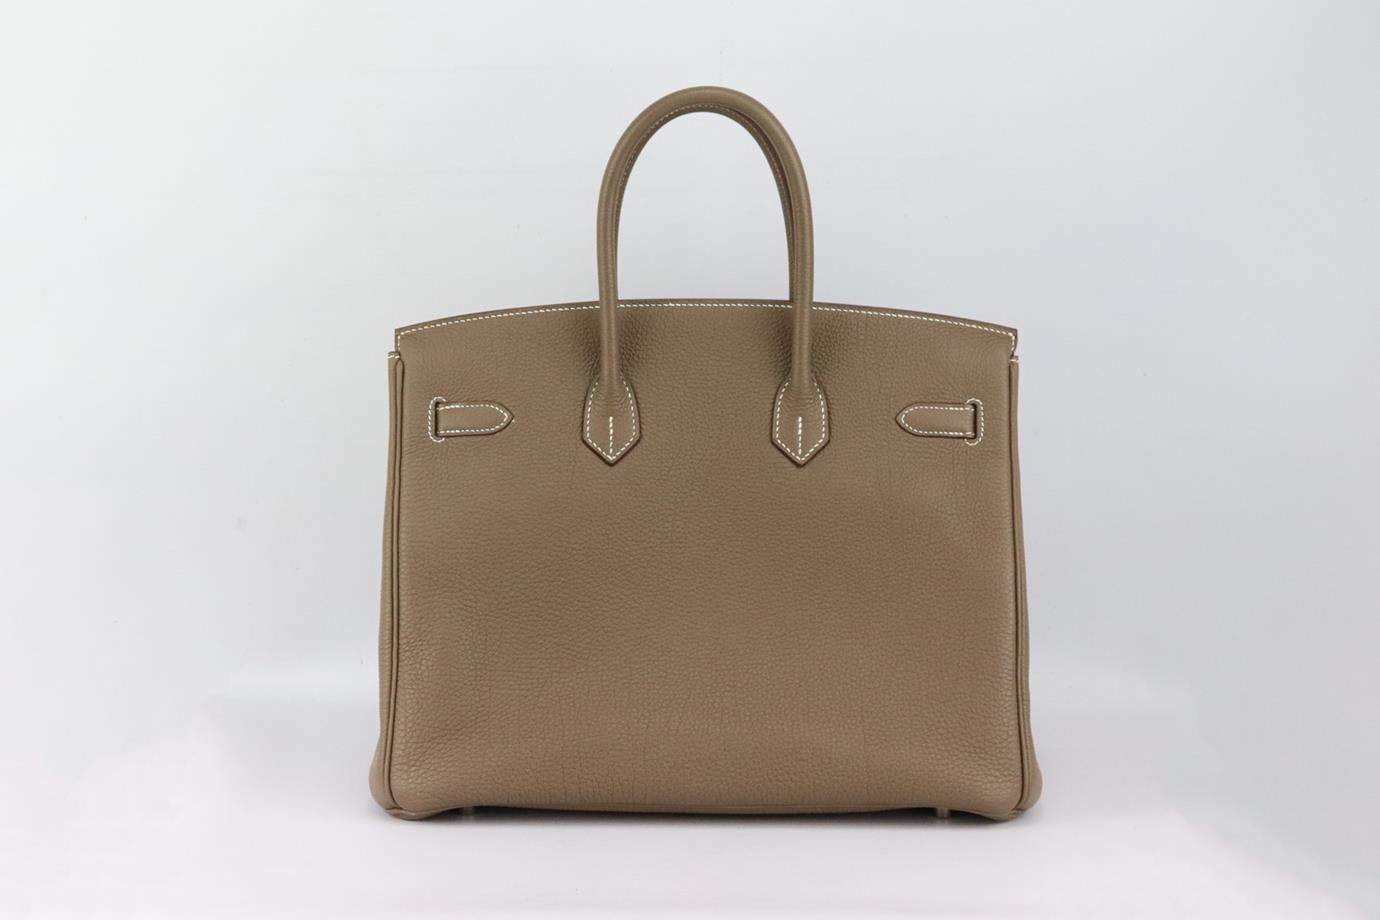 Hermès 2011 Birkin 35cm Togo leather bag. Made in France, this beautiful 2011 Hermès ‘Birkin’ 35cm handbag has been made from taupe ‘Togo’ leather exterior in ‘Etoupe’ with matching interior, this piece is decorated with silver hardware. Taupe